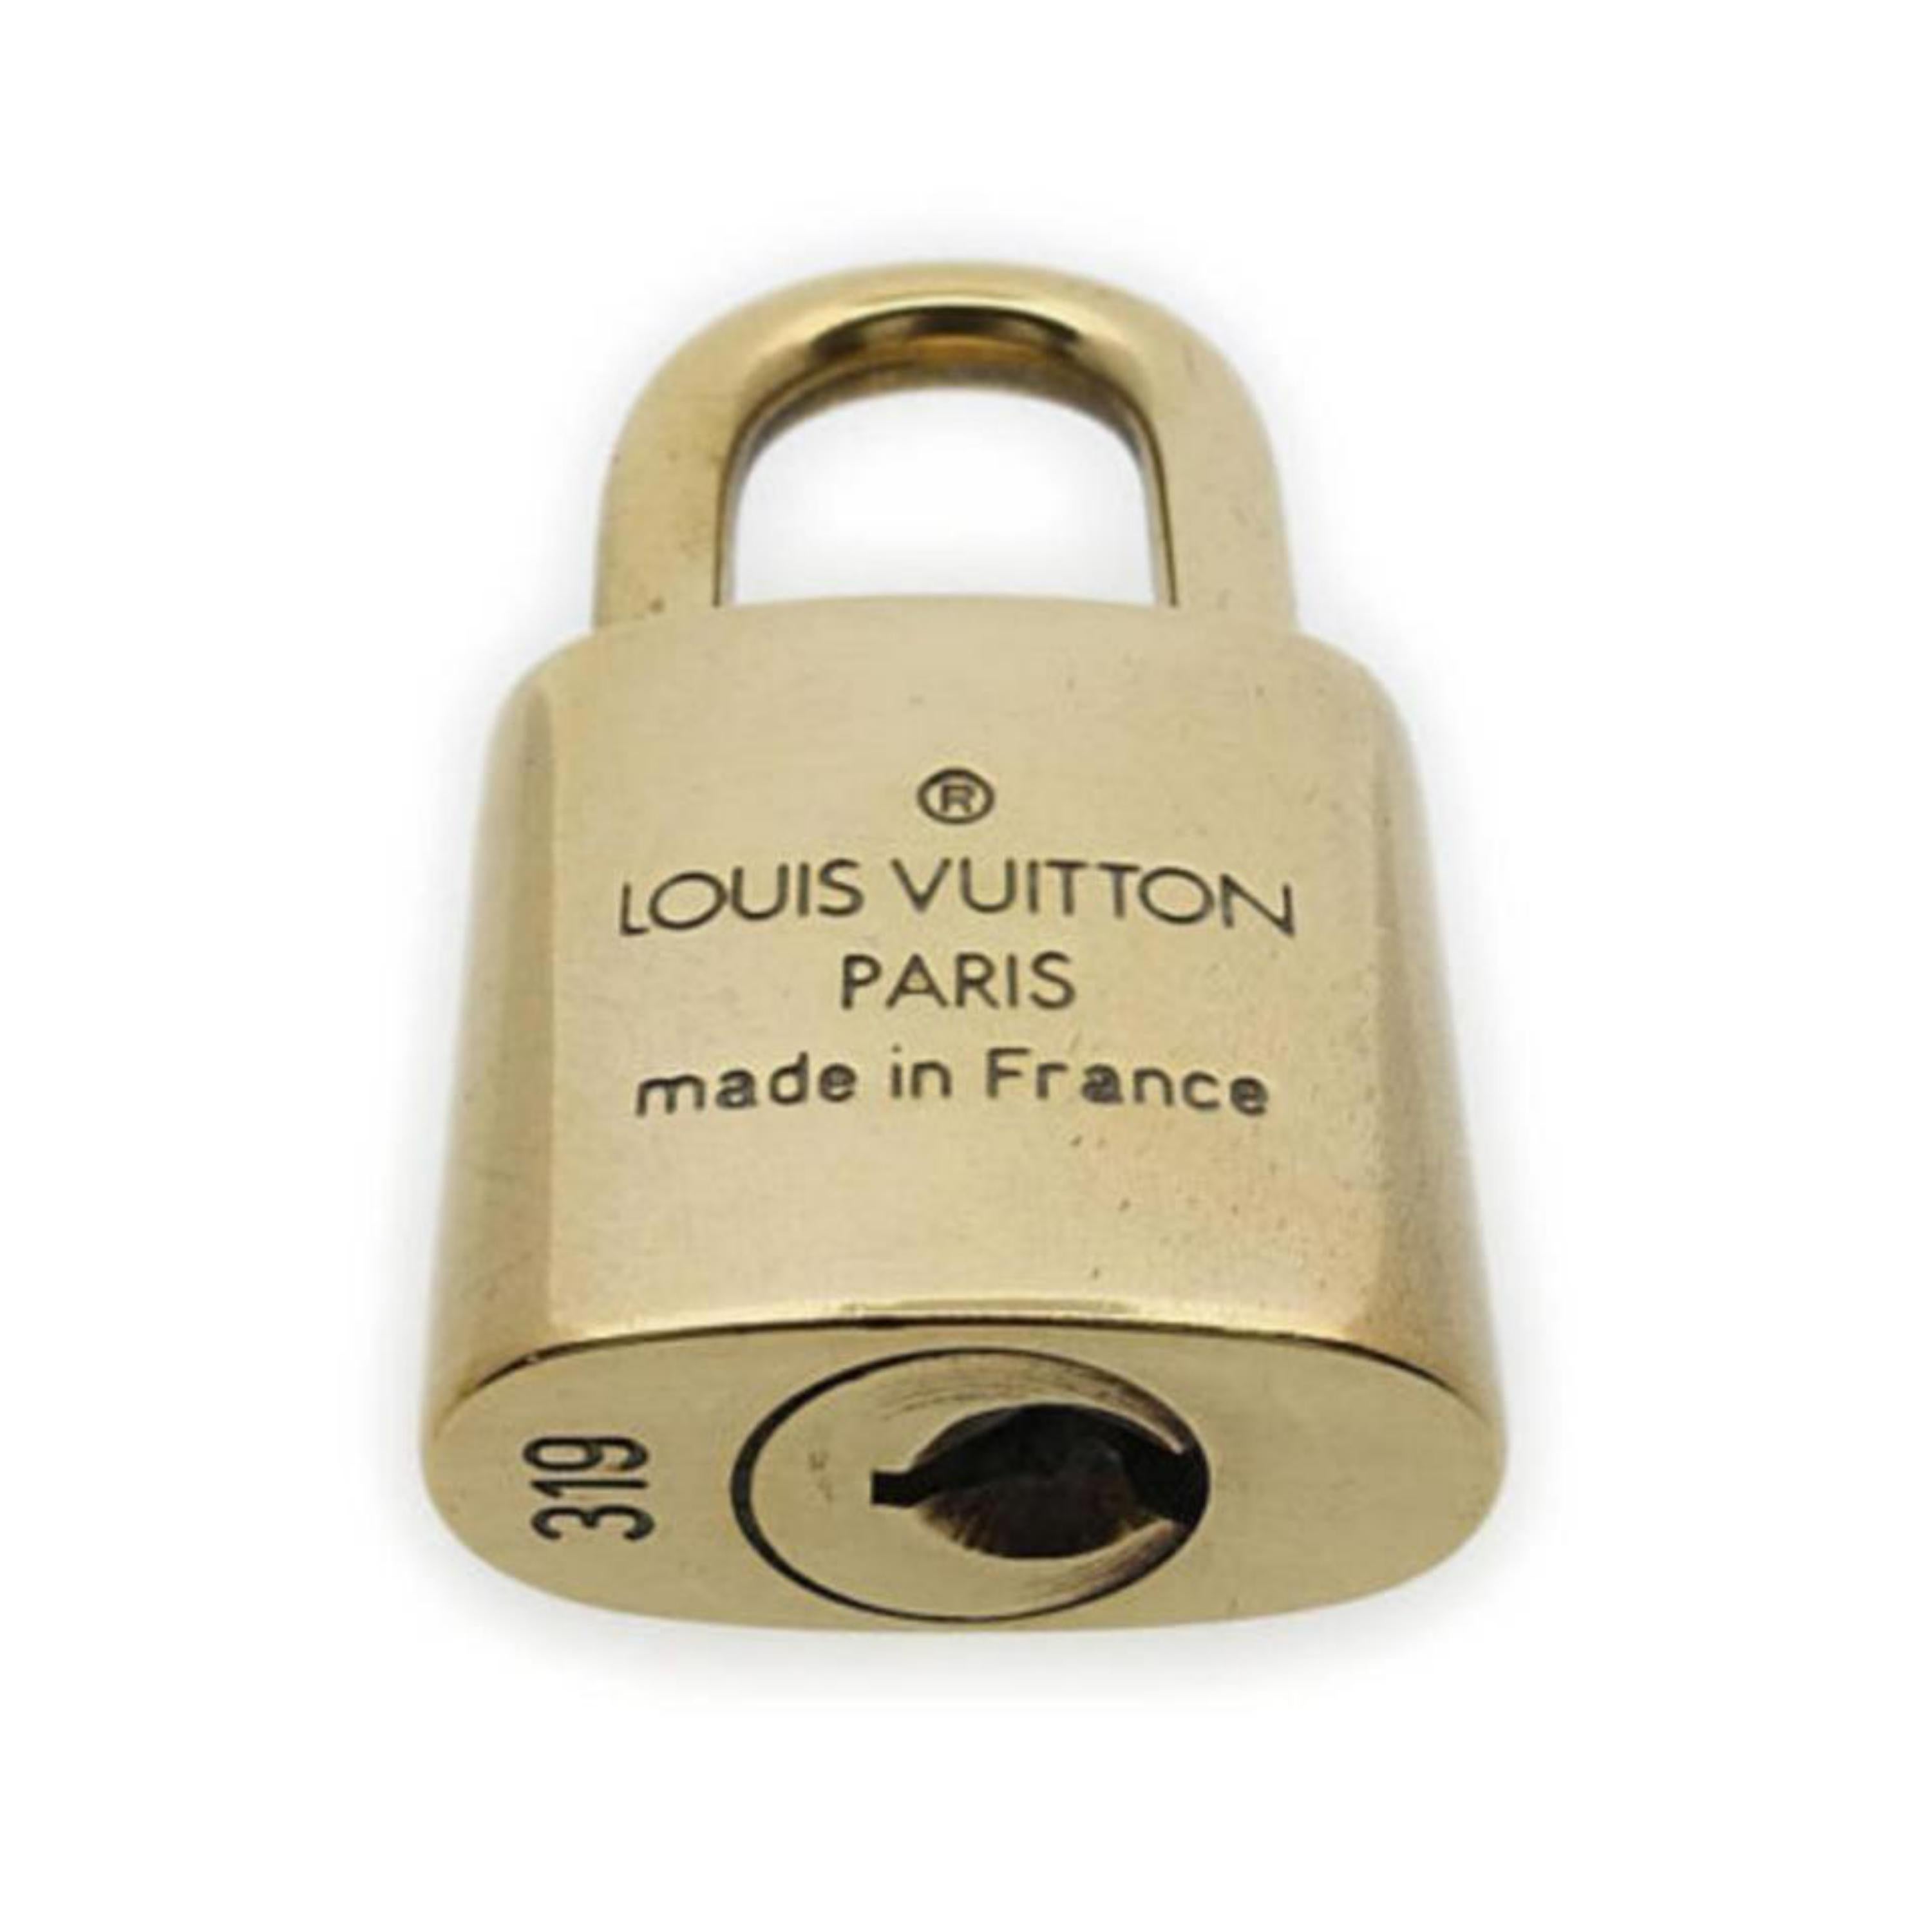 Louis Vuitton Gold Single Key Lock Pad Lock and Key 867698 In Fair Condition For Sale In Forest Hills, NY